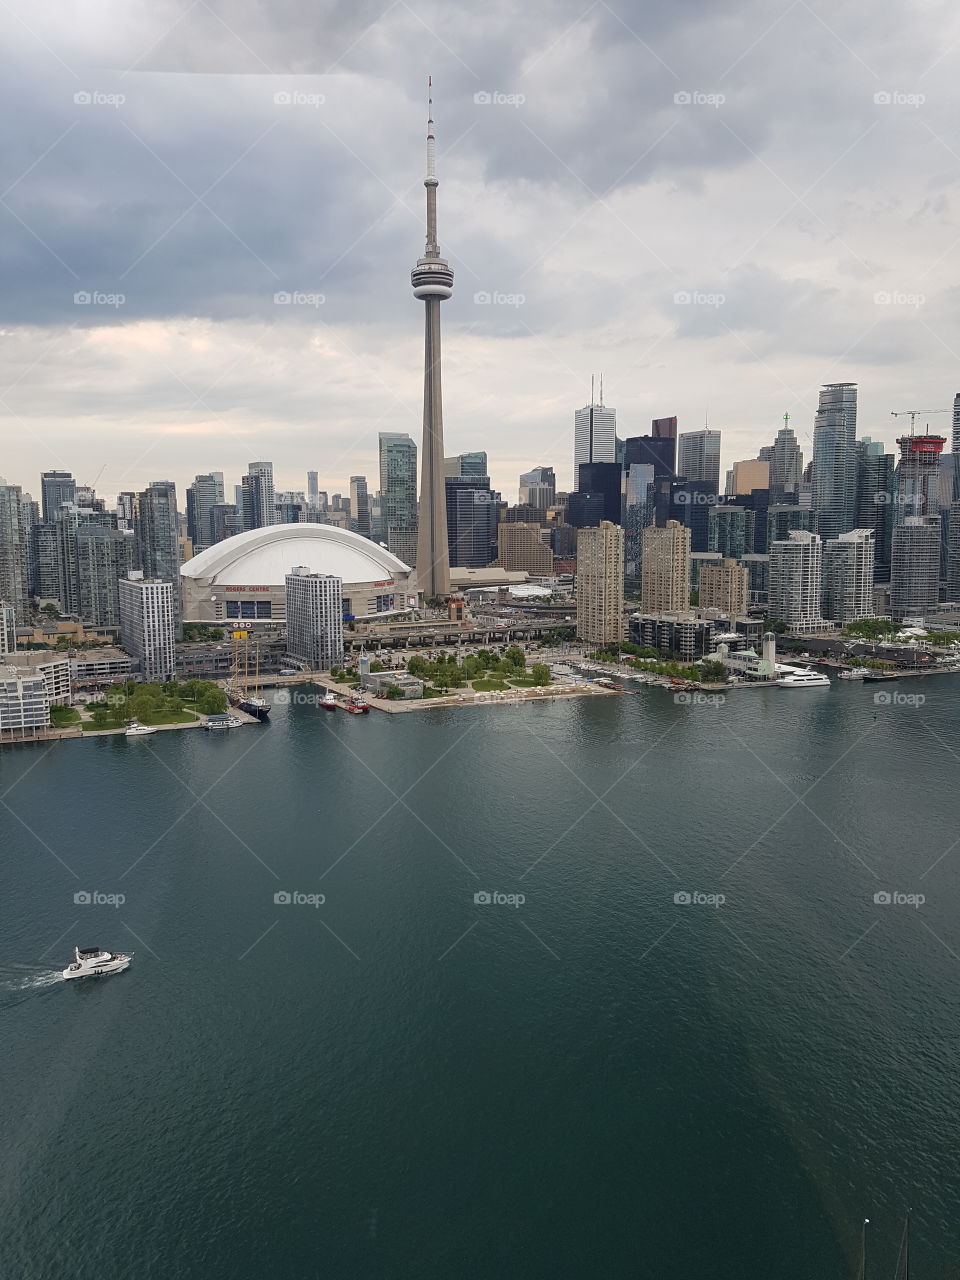 View of Toronto skyline from above, in a helicopter. Cloudy but beautiful weather.